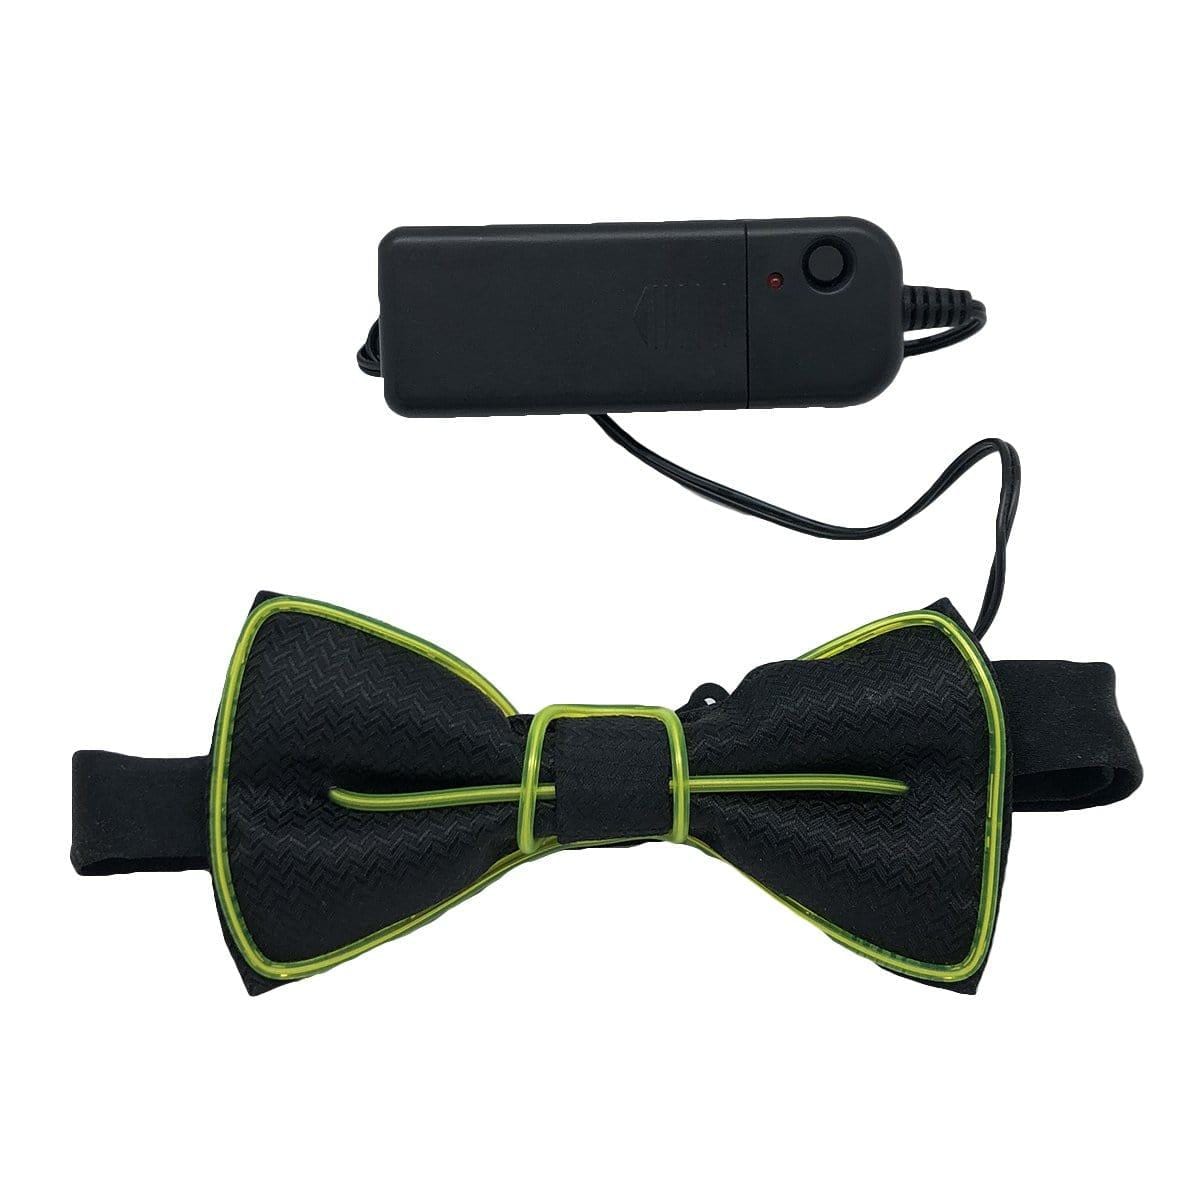 Buy Costume Accessories Light-up LED bowtie - Assortment sold at Party Expert